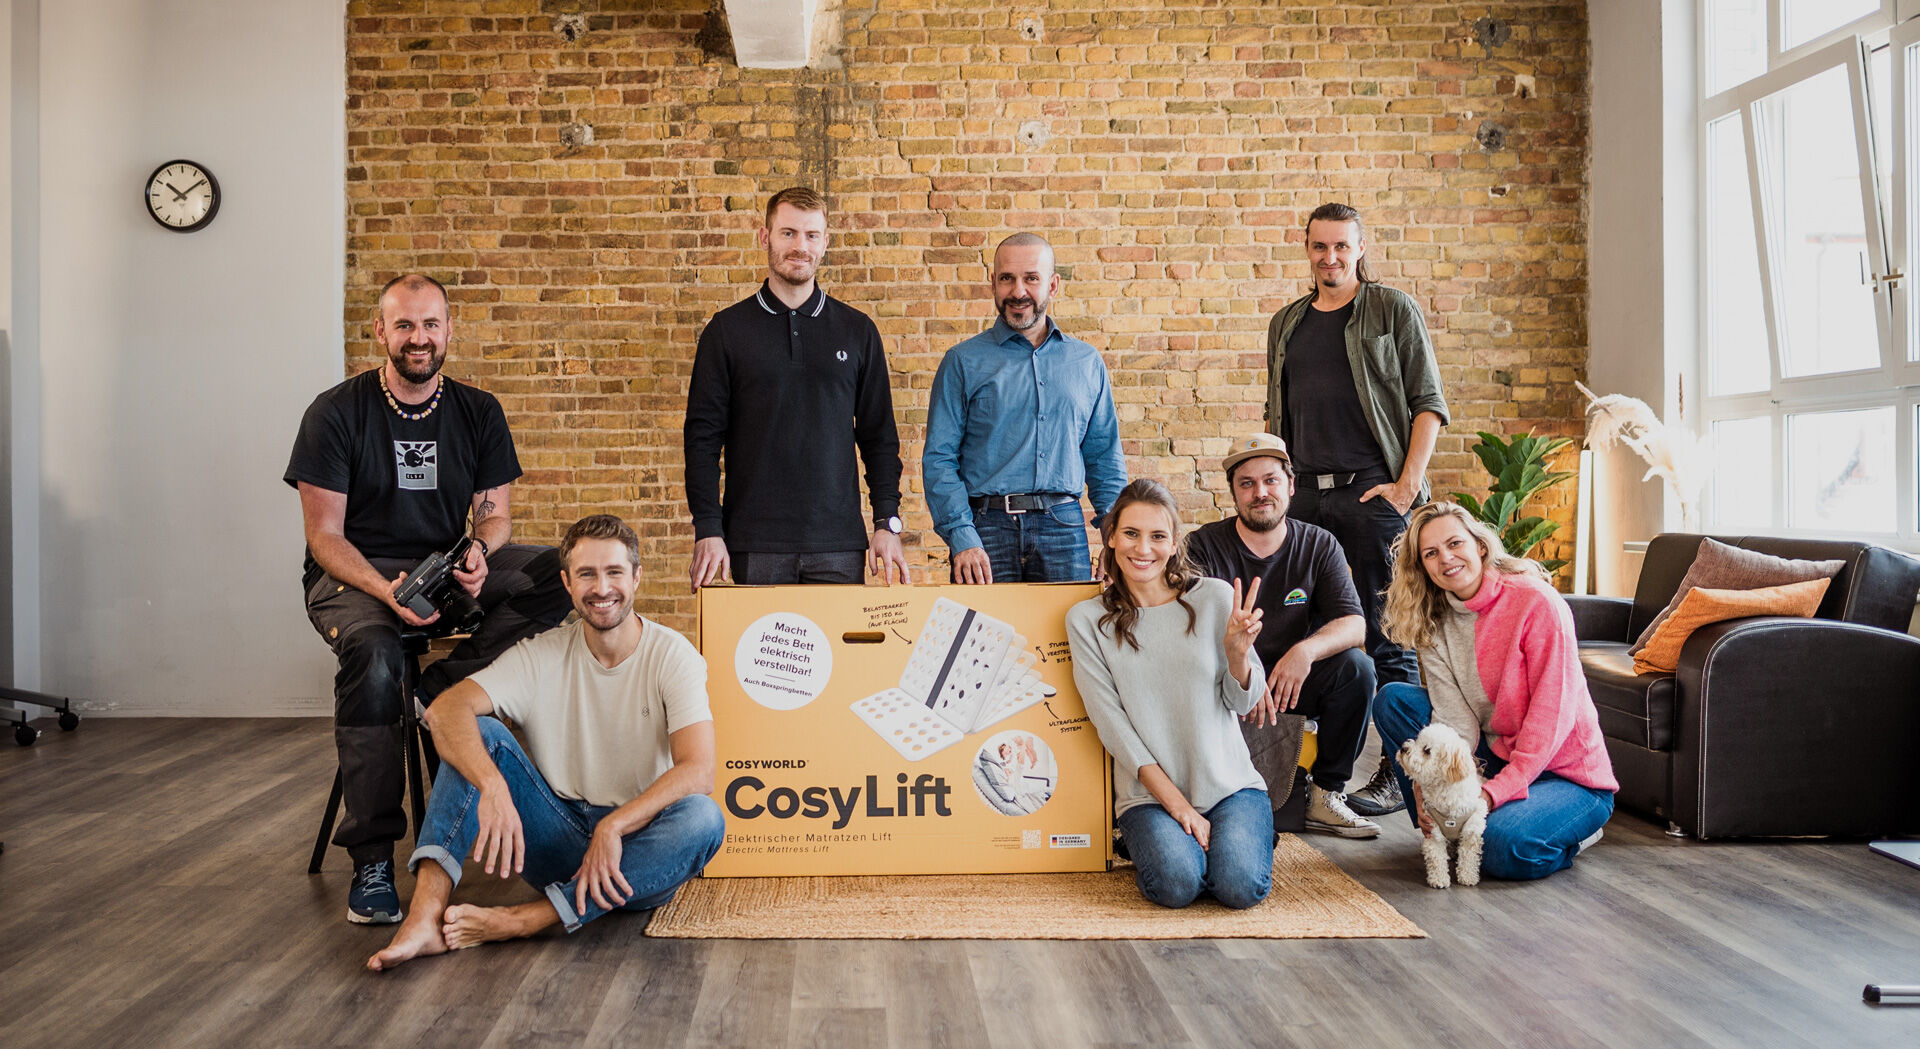 Group picture of the Cosyworld team standing around a CosyLift package